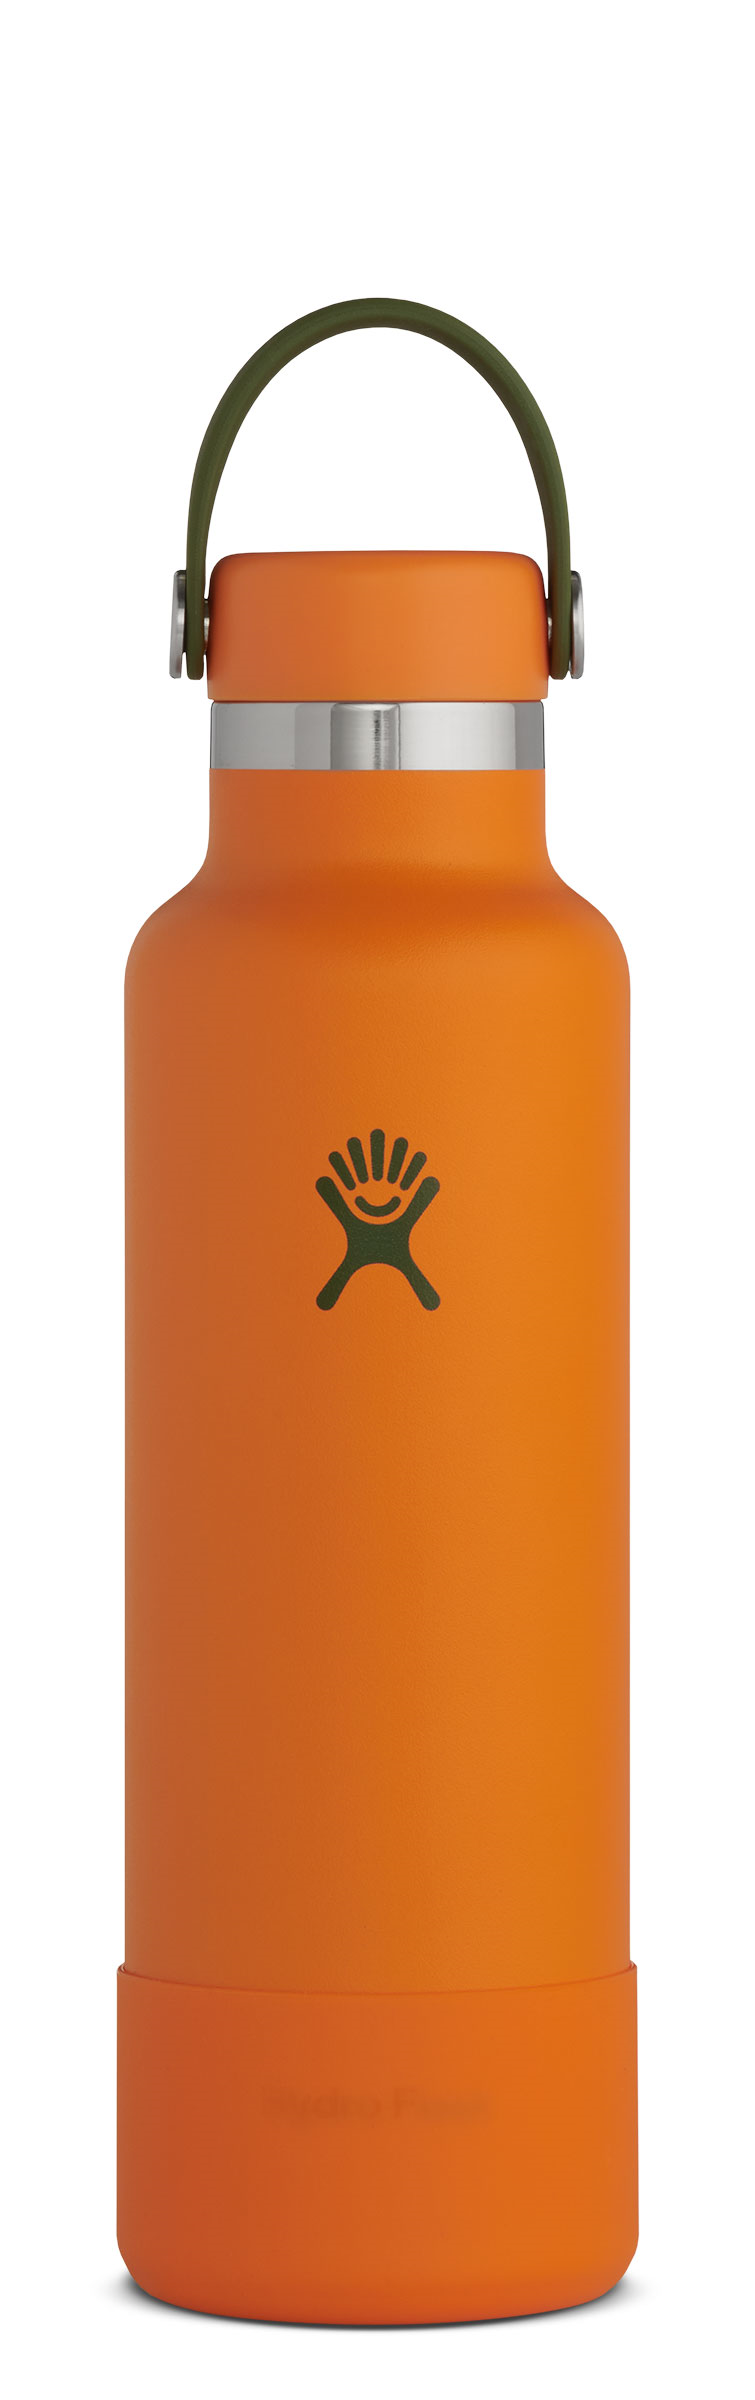 Hydro Flask Prism Pop Limited Edition 21 oz Standard Mouth - Bubble